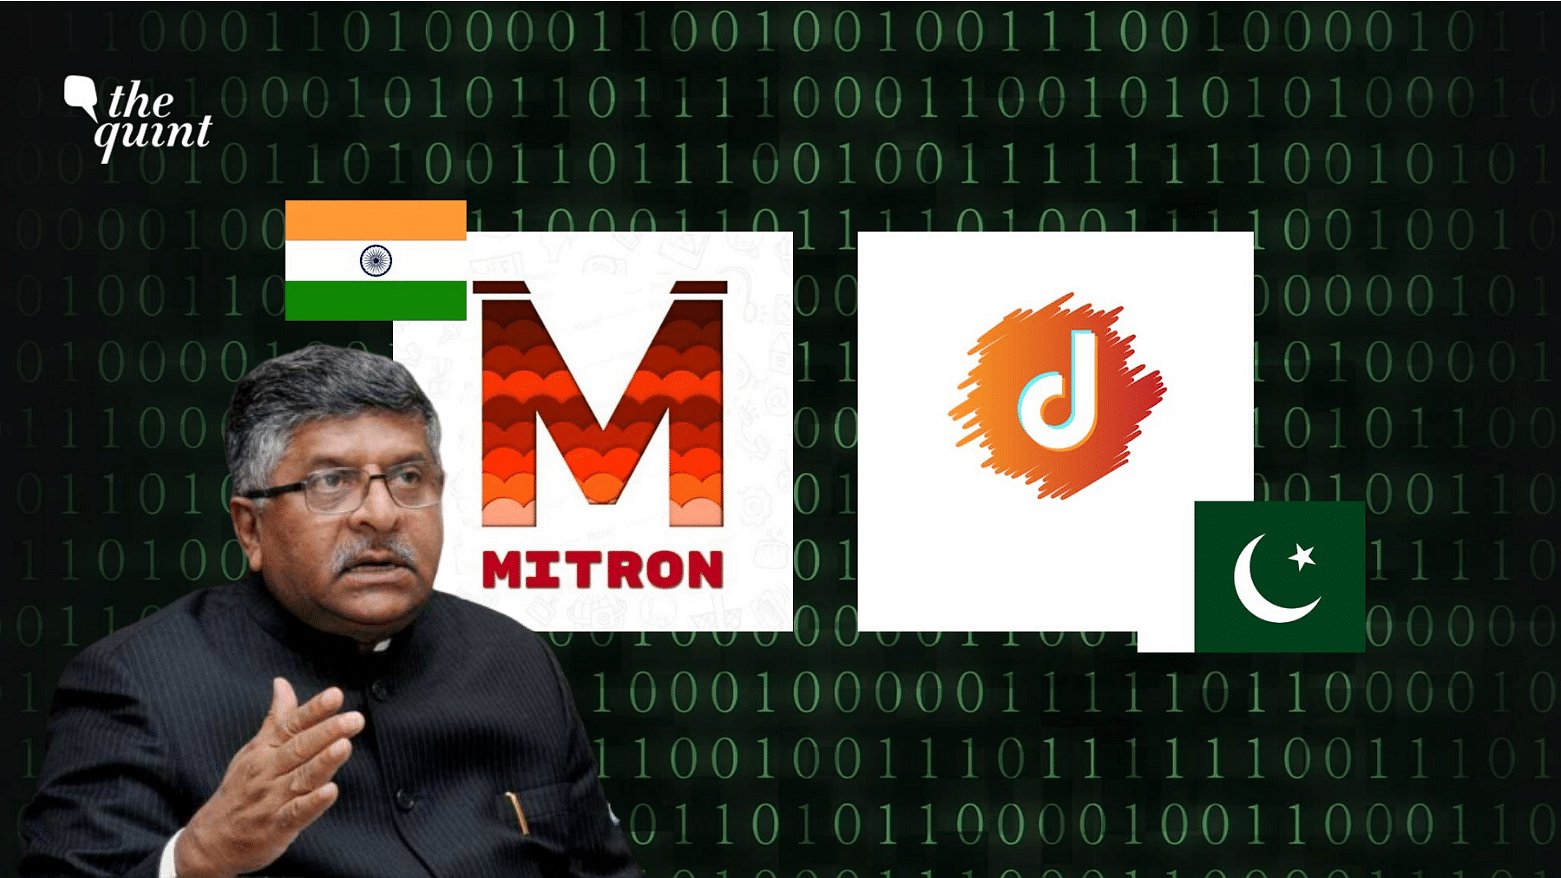 On the same day when Mitron was proven to have not been developed in India, Electronics &amp; IT Minister Ravi Shankar Prasad hailed the app as India’s answer to TikTok and Facebook.